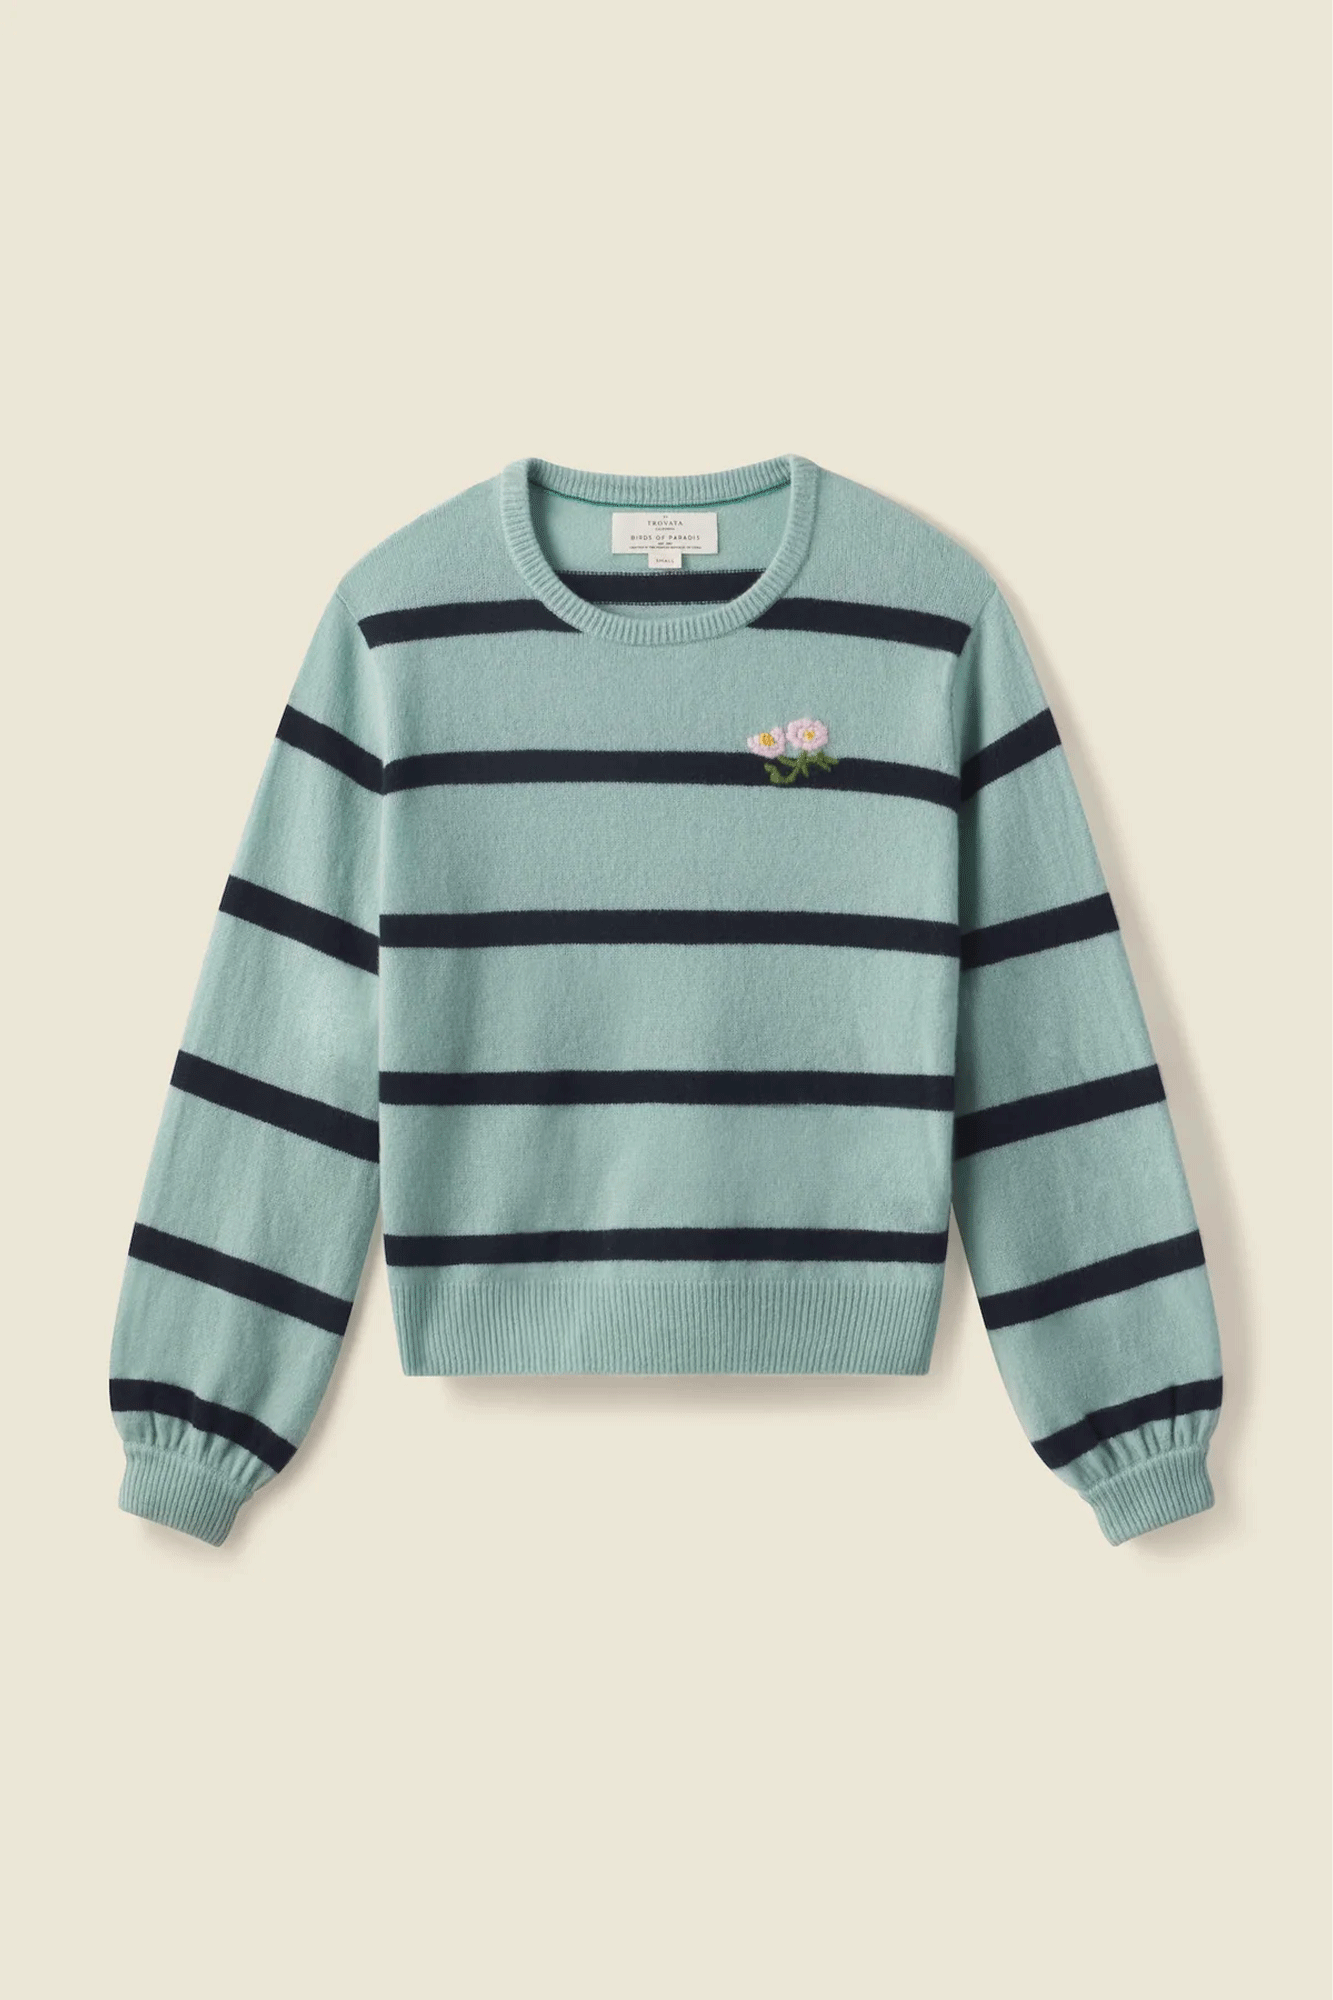 Enjoy the luxurious comfort of the Ryann Sweater from Trovata, made from 100% cashmere -- soft, lightweight, and perfect for all seasons. The green and navy stripe pattern adds a stylish flair to any ensemble. Feel confident all year round in this trendy and timeless piece.